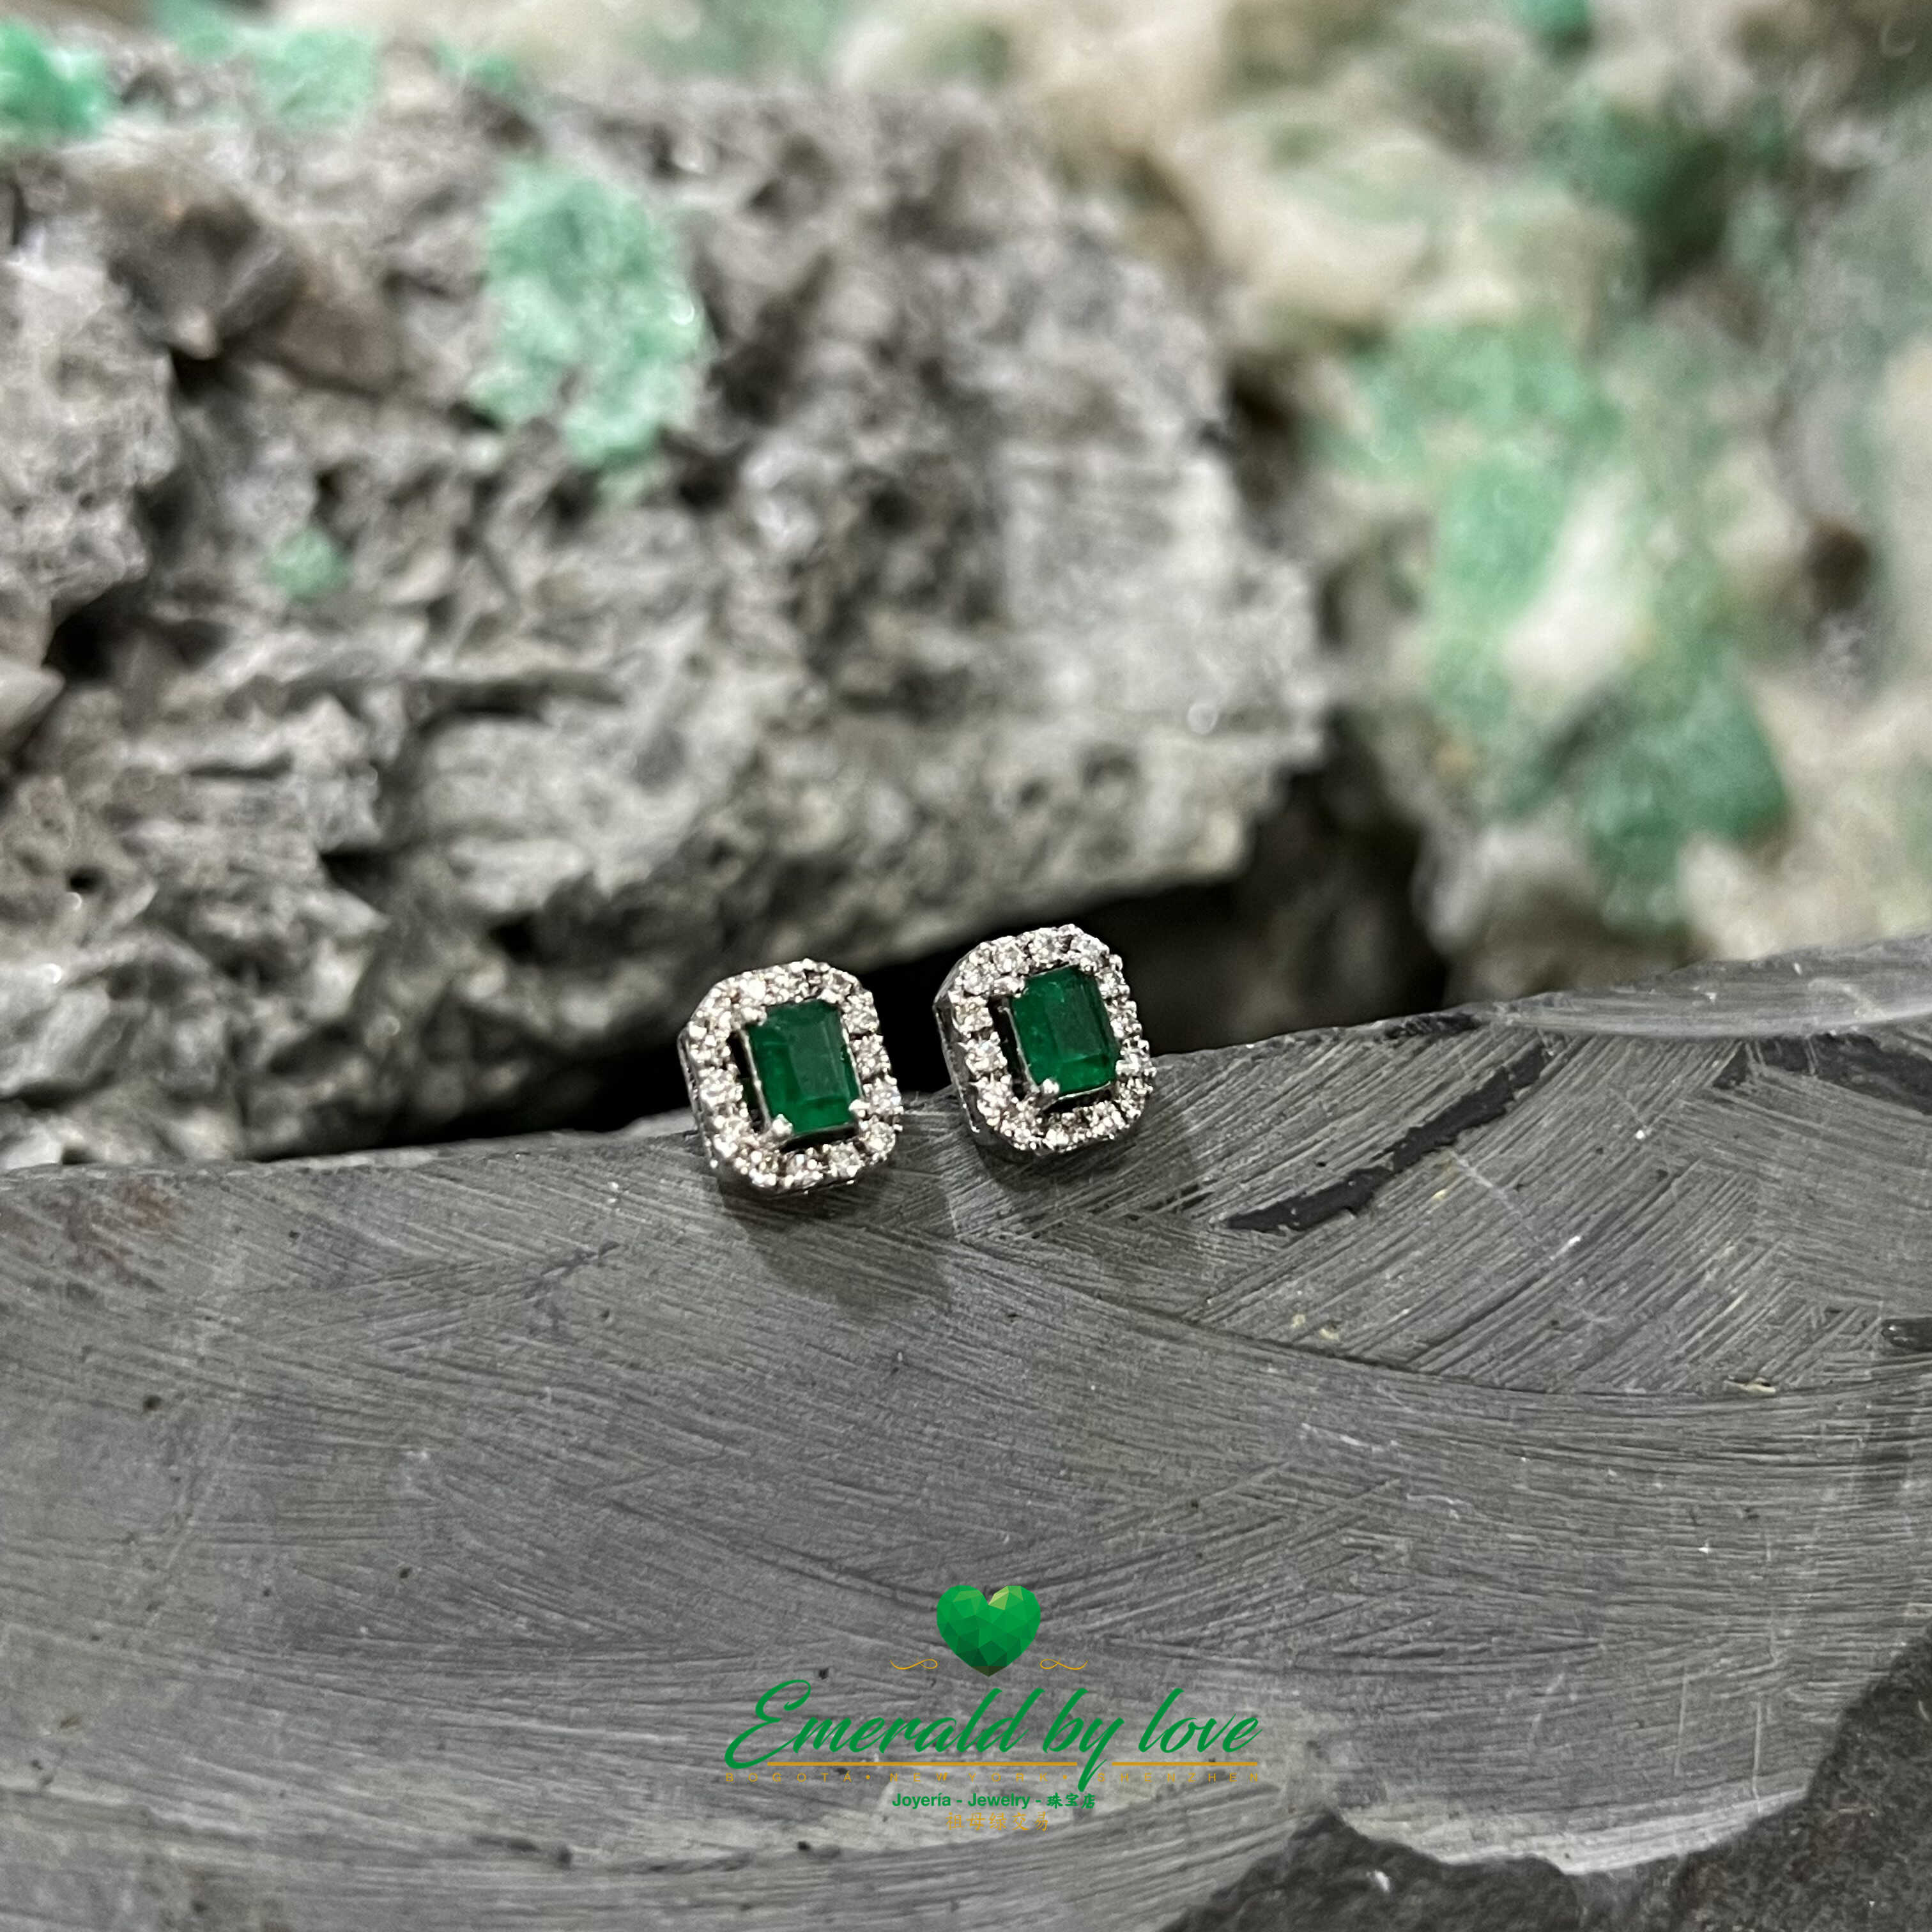 Regal Marquise White Gold Earrings with 1.10 Ct Emerald Cut Emeralds and 0.28 Ct Diamonds